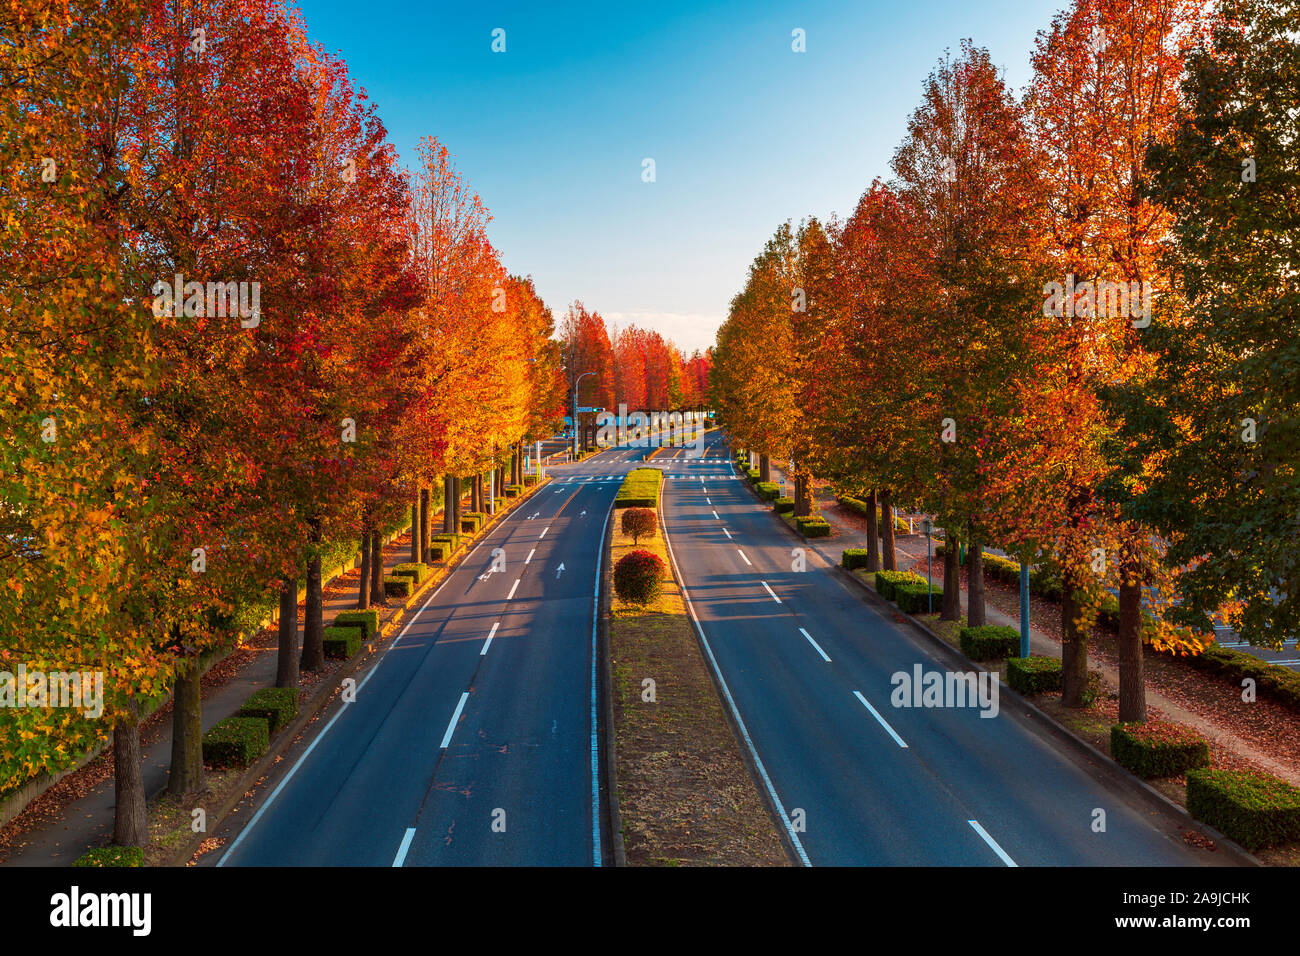 Landscape of autumn tress with a leading country road in Tsukuba, Japan Stock Photo